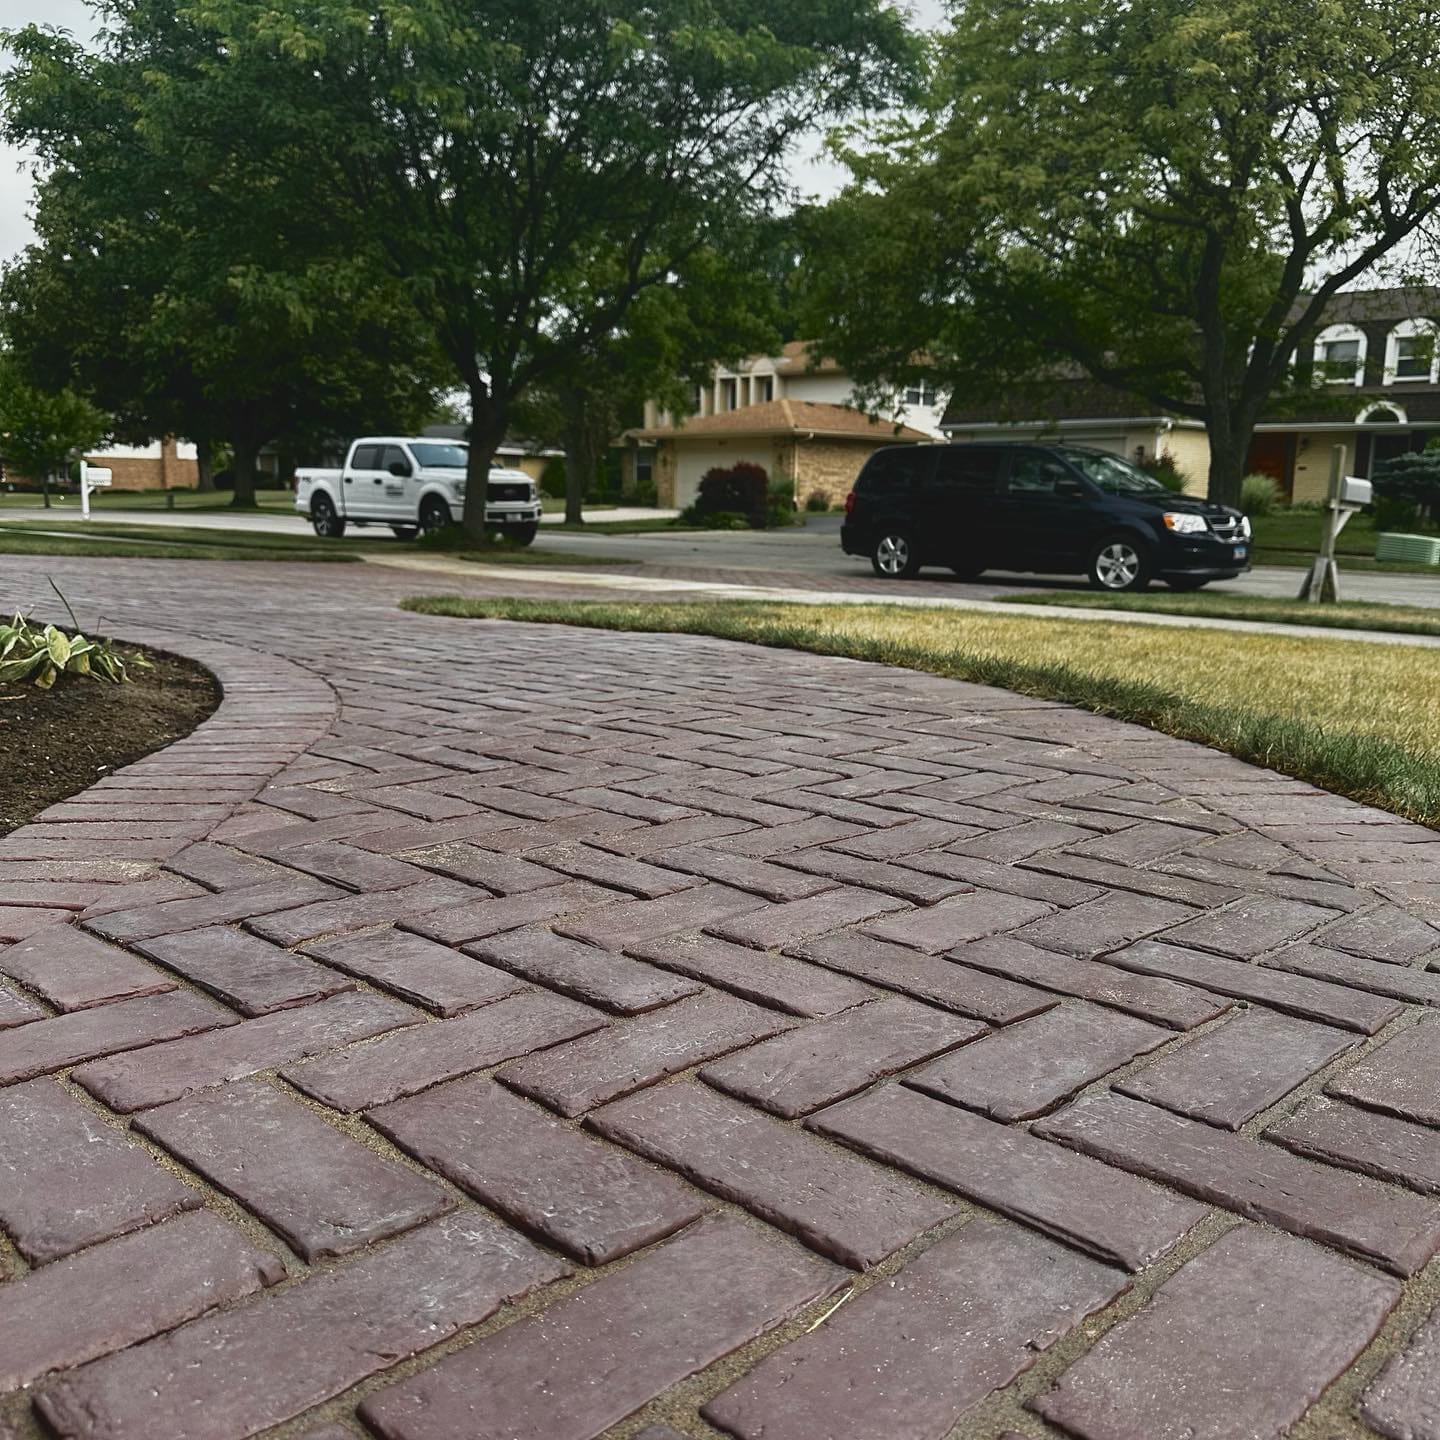 Chicago-Style Unilock Pavers Used In The Redesign & Build Of A Homeowner's Driveway In Glenview, IL Located Just North Of Chicago IL